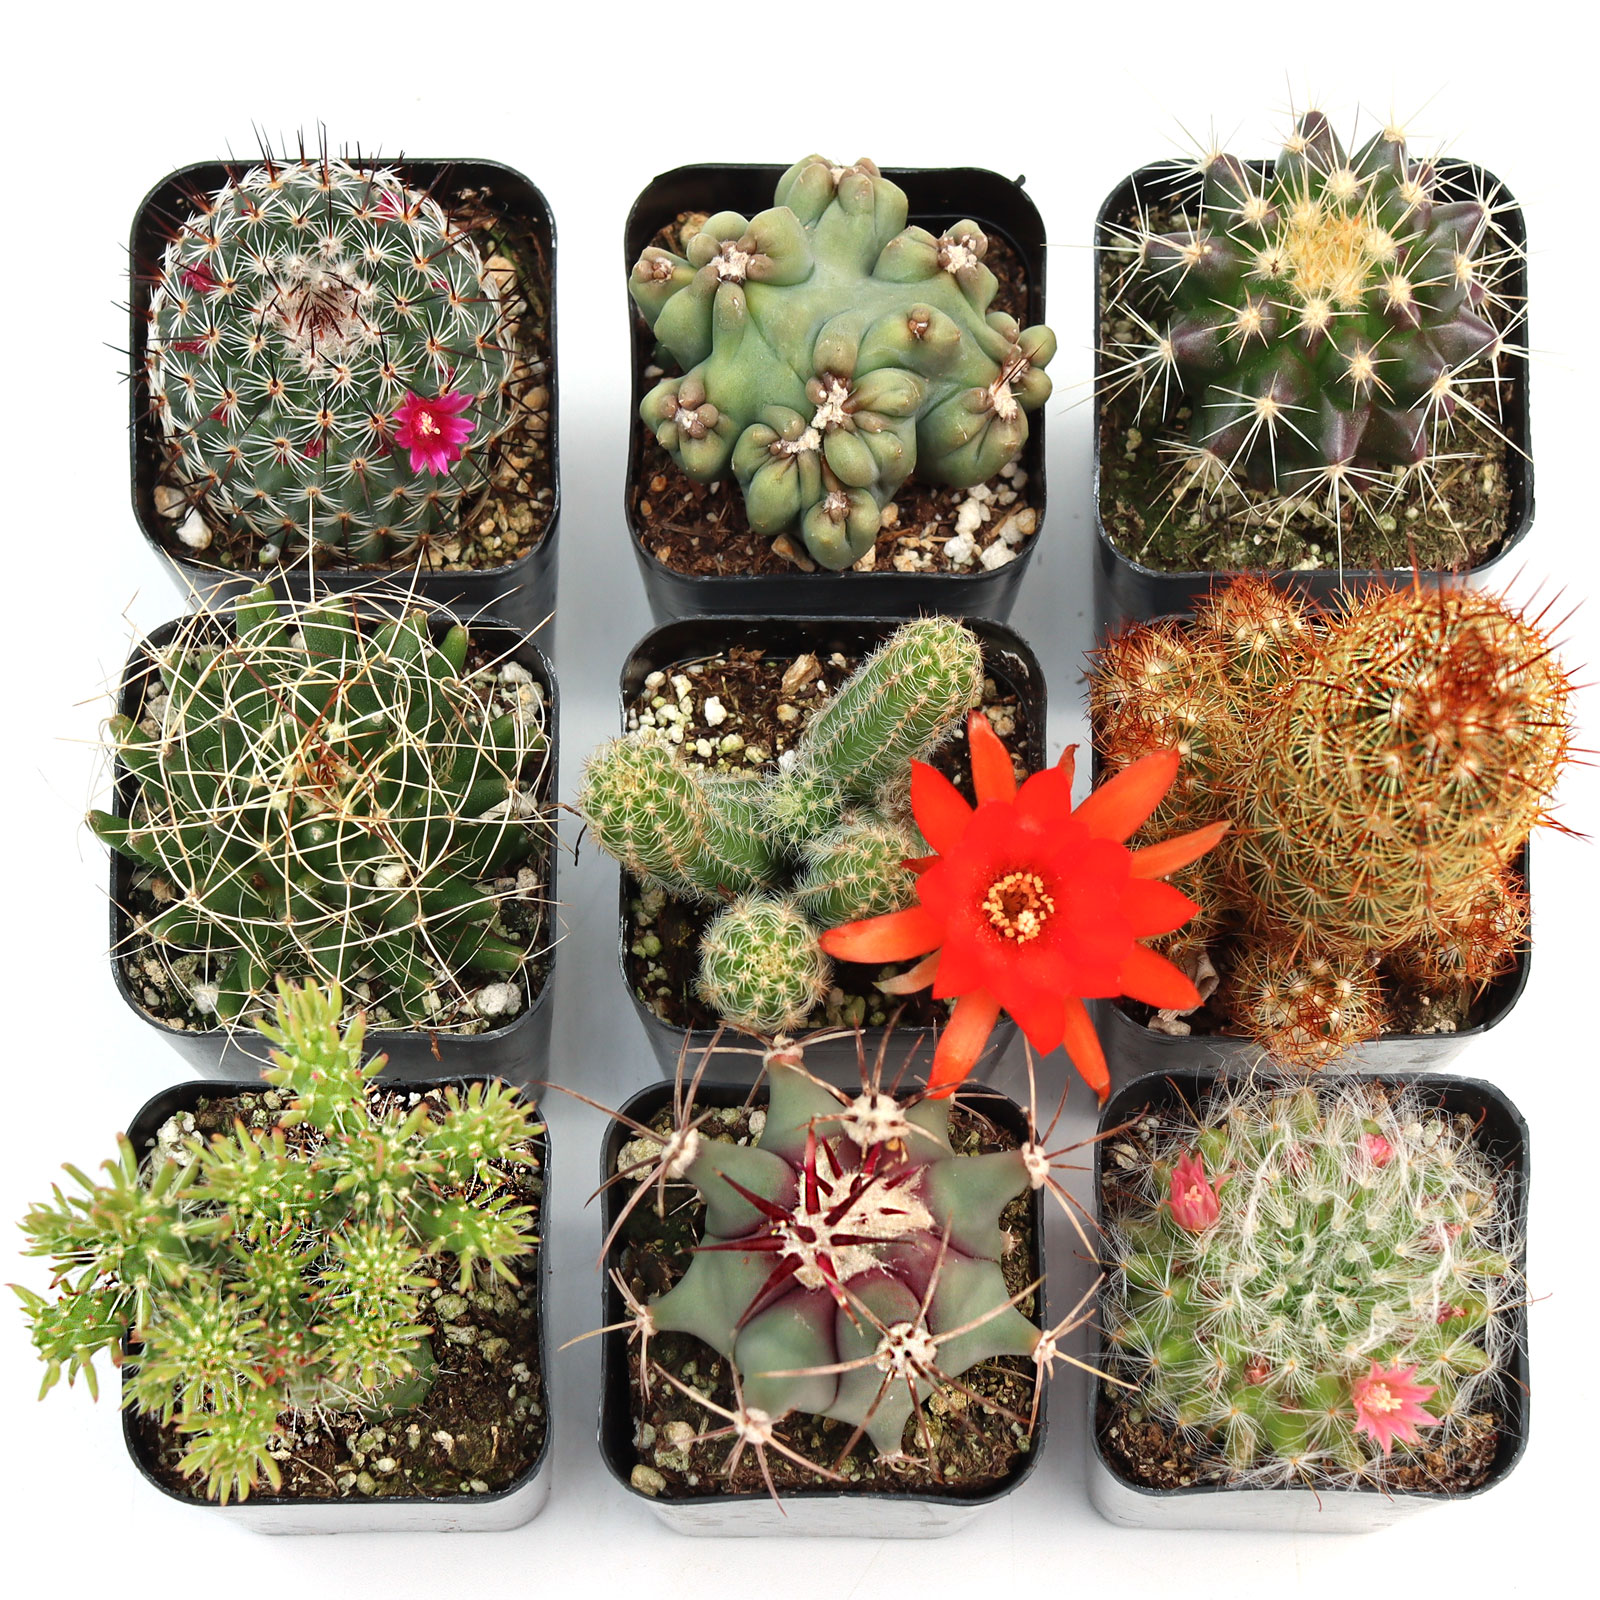 If I order the cactus set of 9 and order 2 sets will I get 18 different cactus